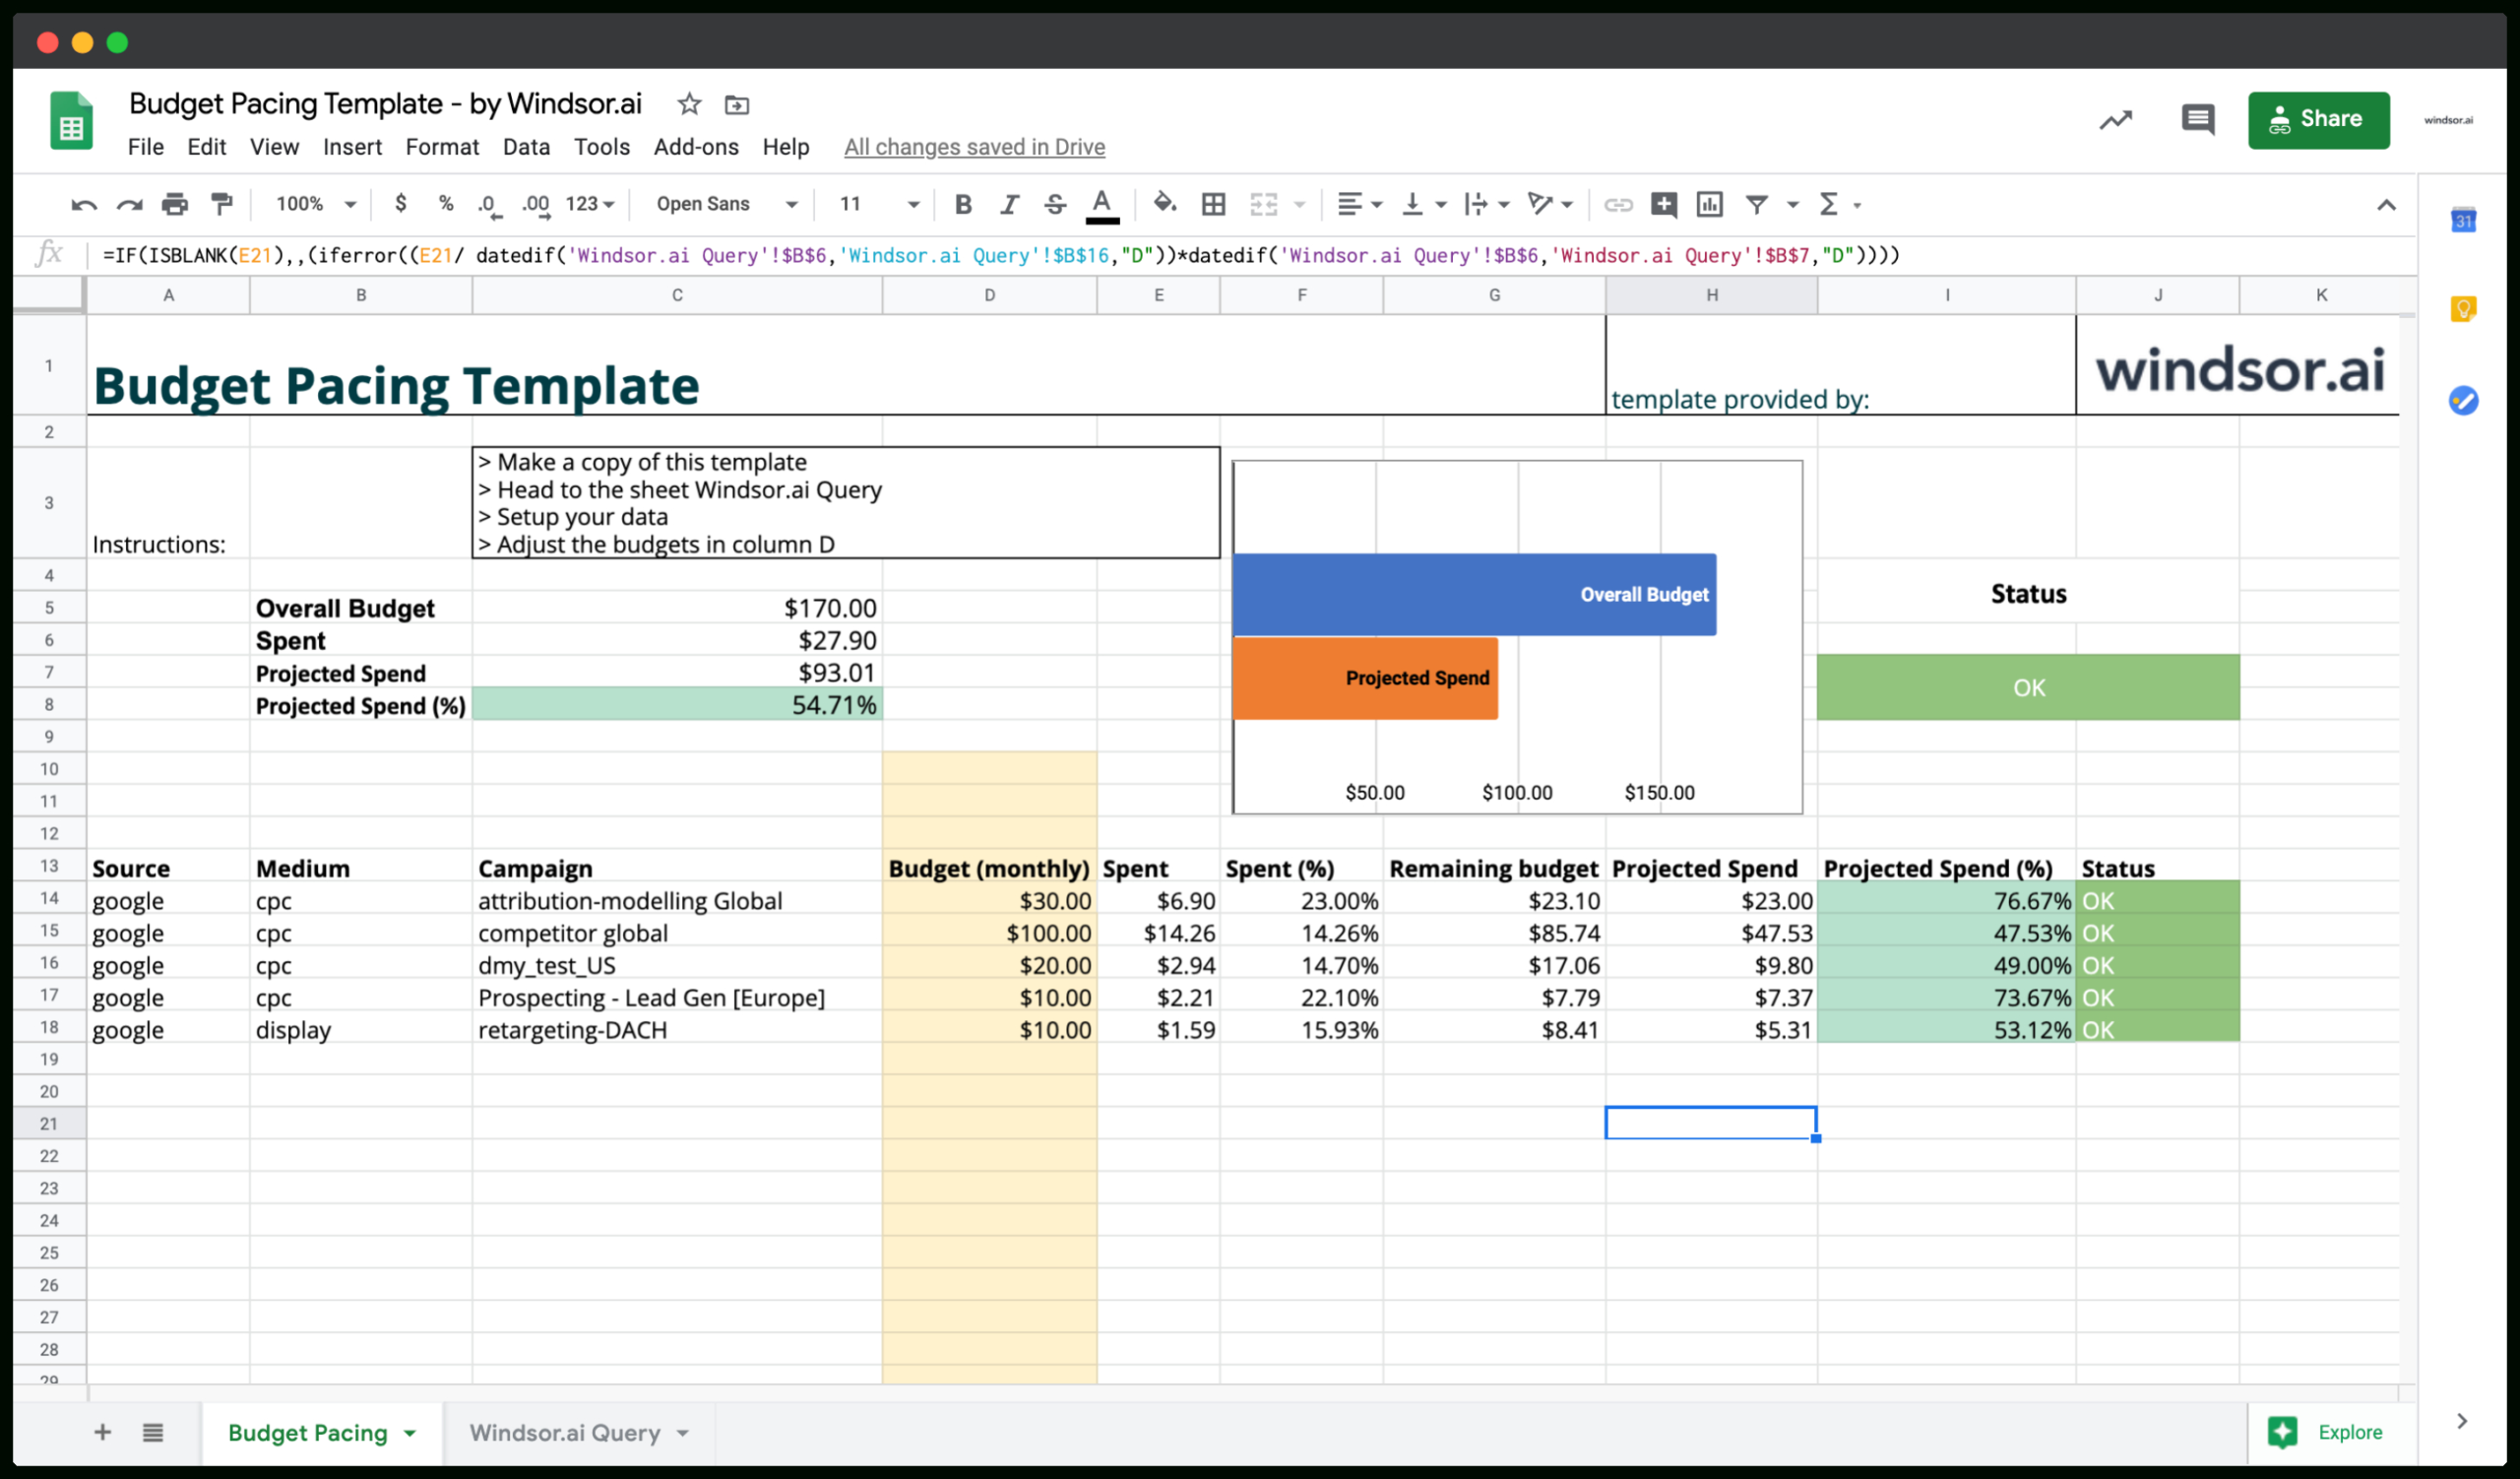 Google Sheets Budget Pacing Template For Google Ads in Amazing Does Google Sheets Have A Budget Template